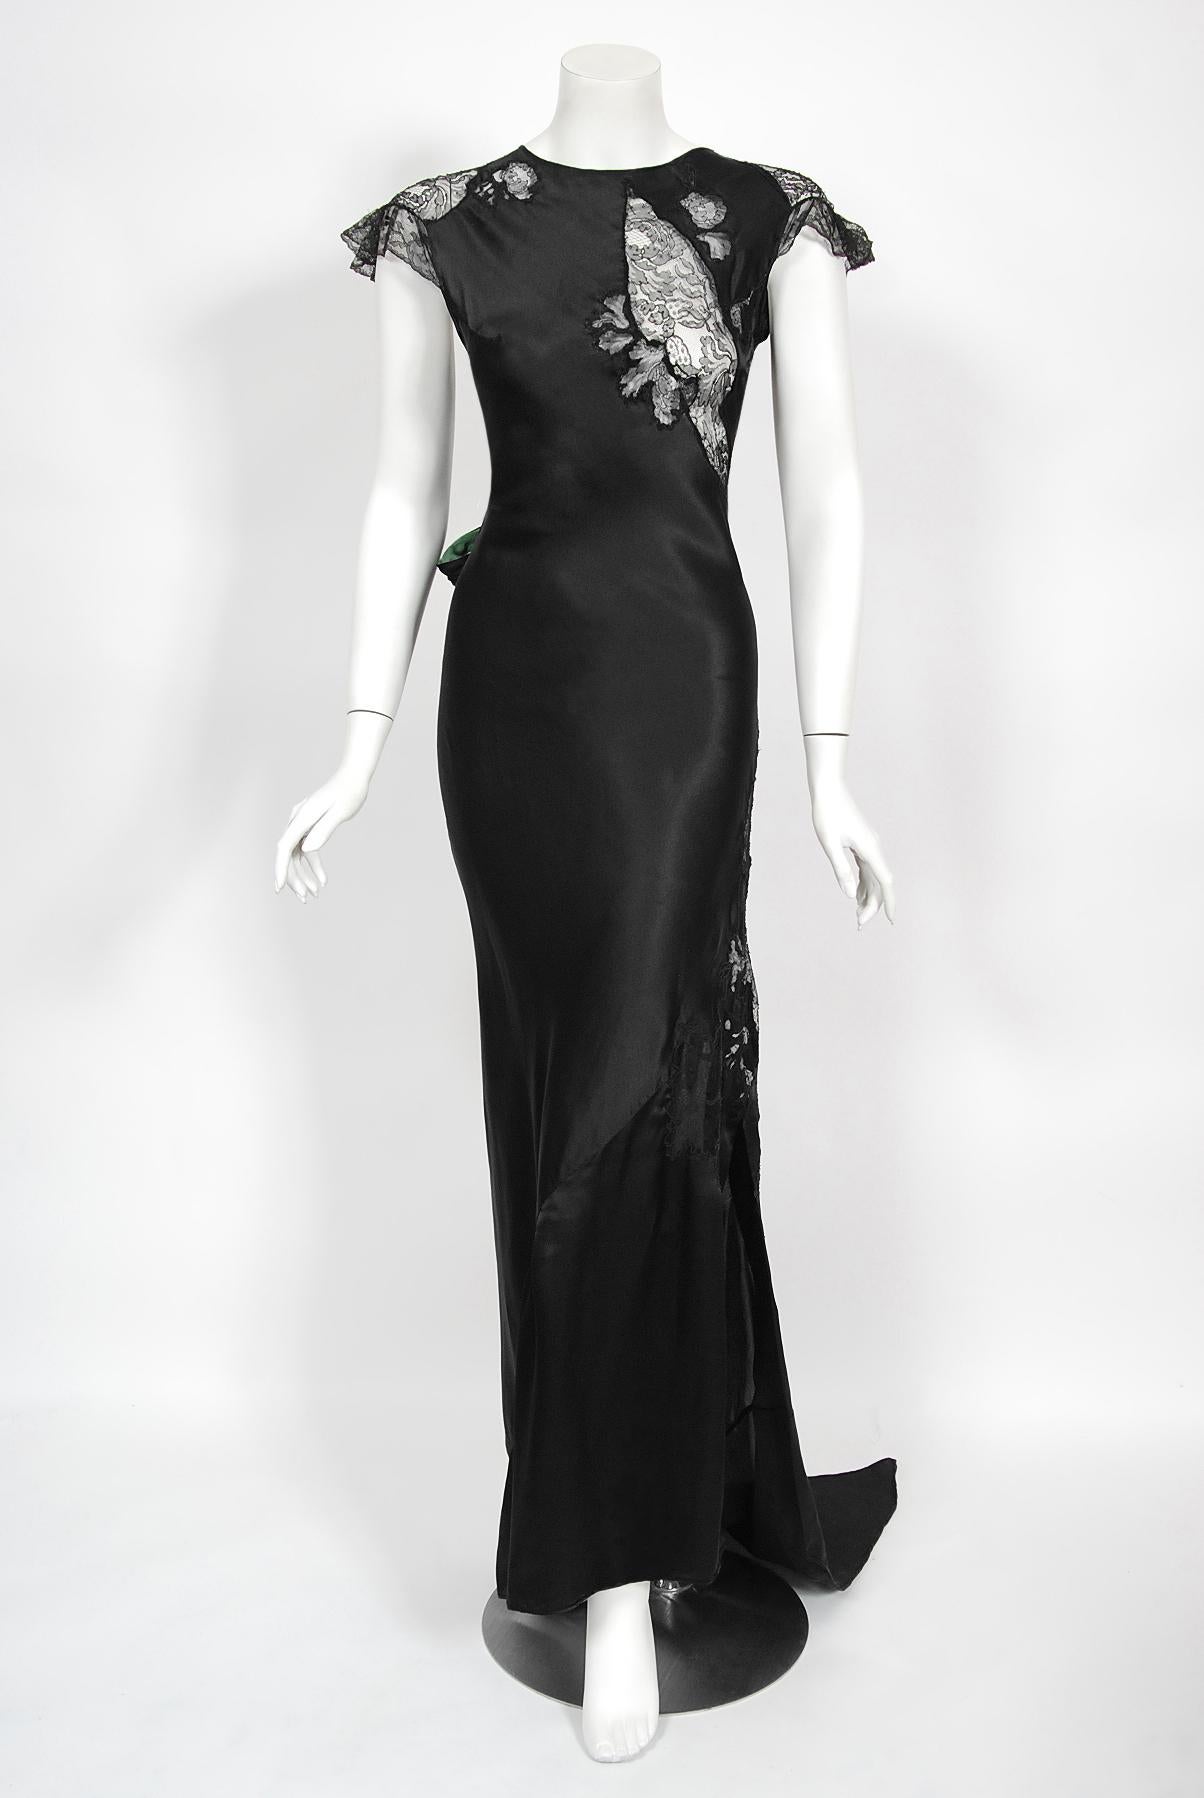 There are lots of lovely 1930's garments still around, but every once in a while I come across one that sets my heart a flutter! This is an extraordinarily beautiful black silk and fine chantilly-lace sculpted full length showstopper. Old Hollywood